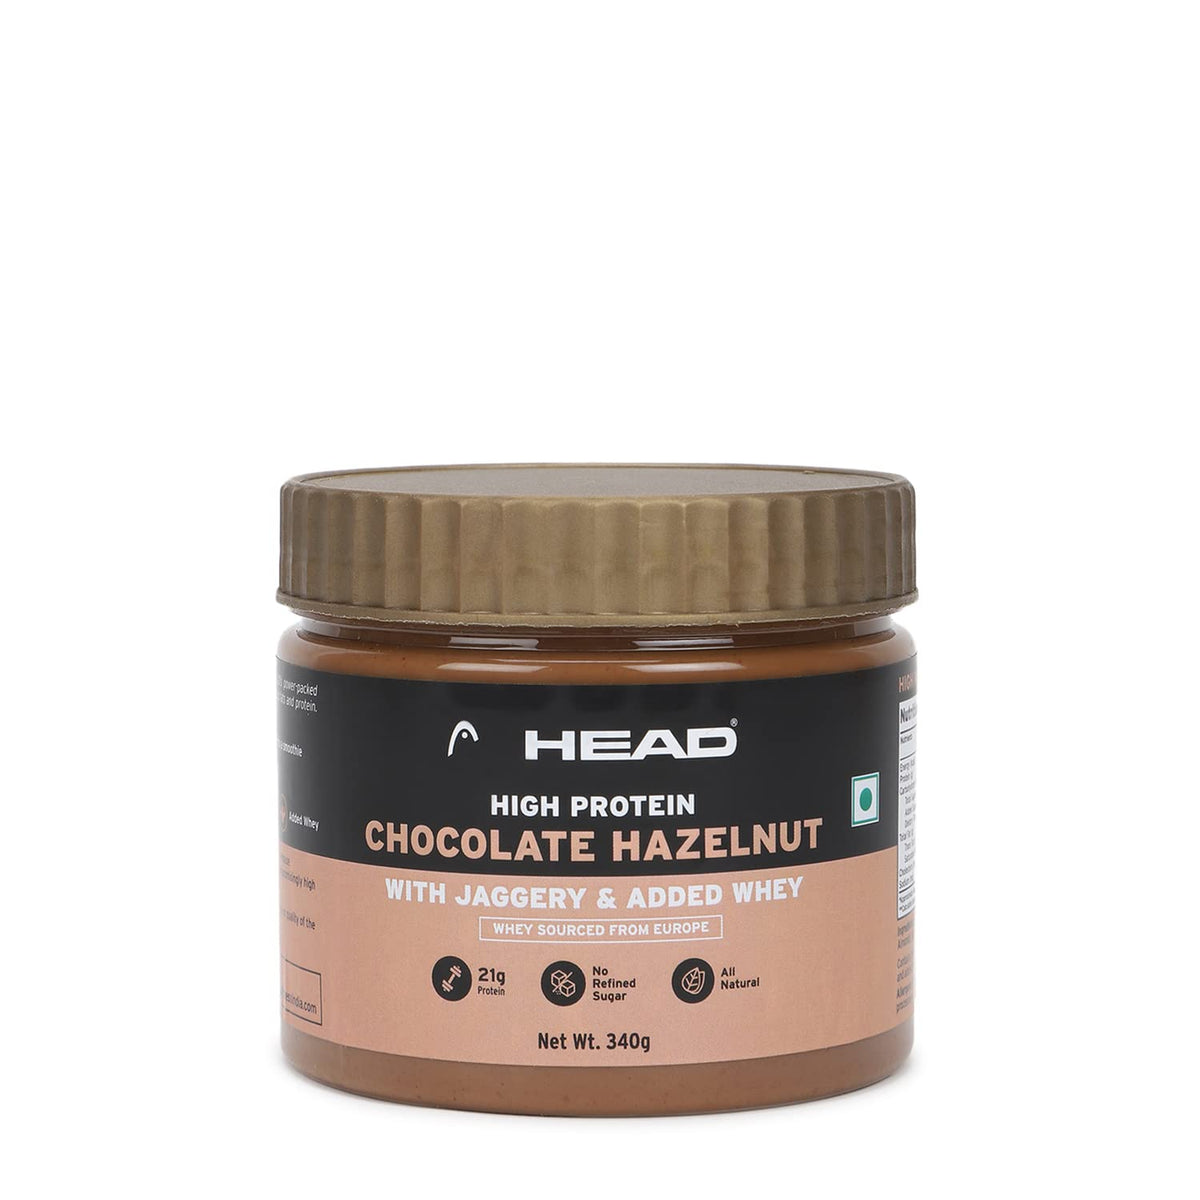 Head High Protein Nutbutter (340g, Chocolate Hazelnut Spread) | 100% Pure Nuts | Added Whey and Jaggery | Protein & Fiber Rich Nutritious Snack